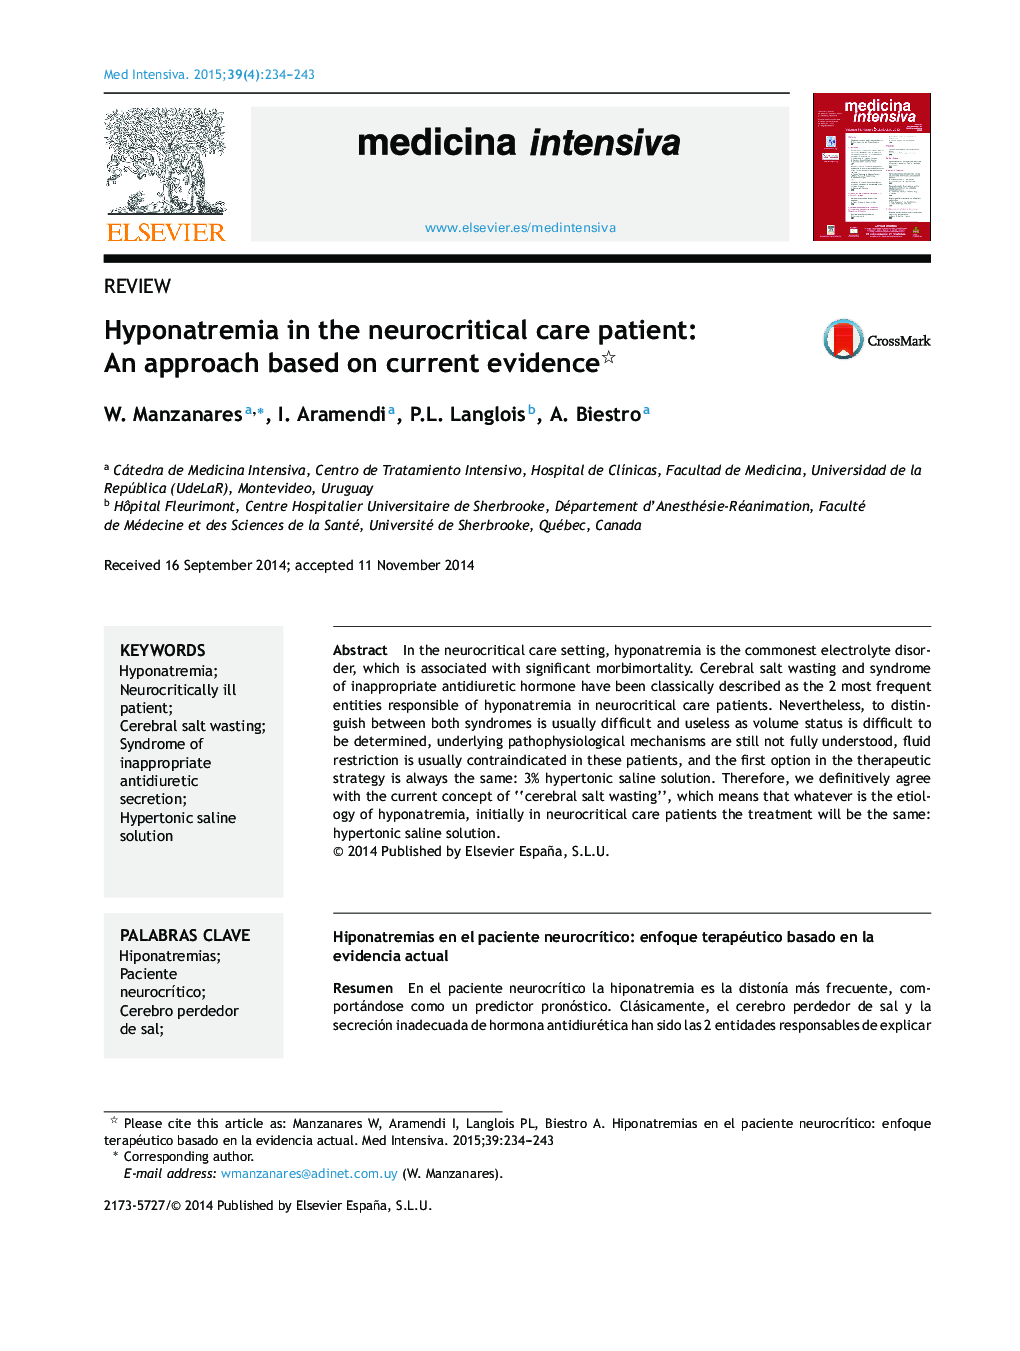 Hyponatremia in the neurocritical care patient: An approach based on current evidence 